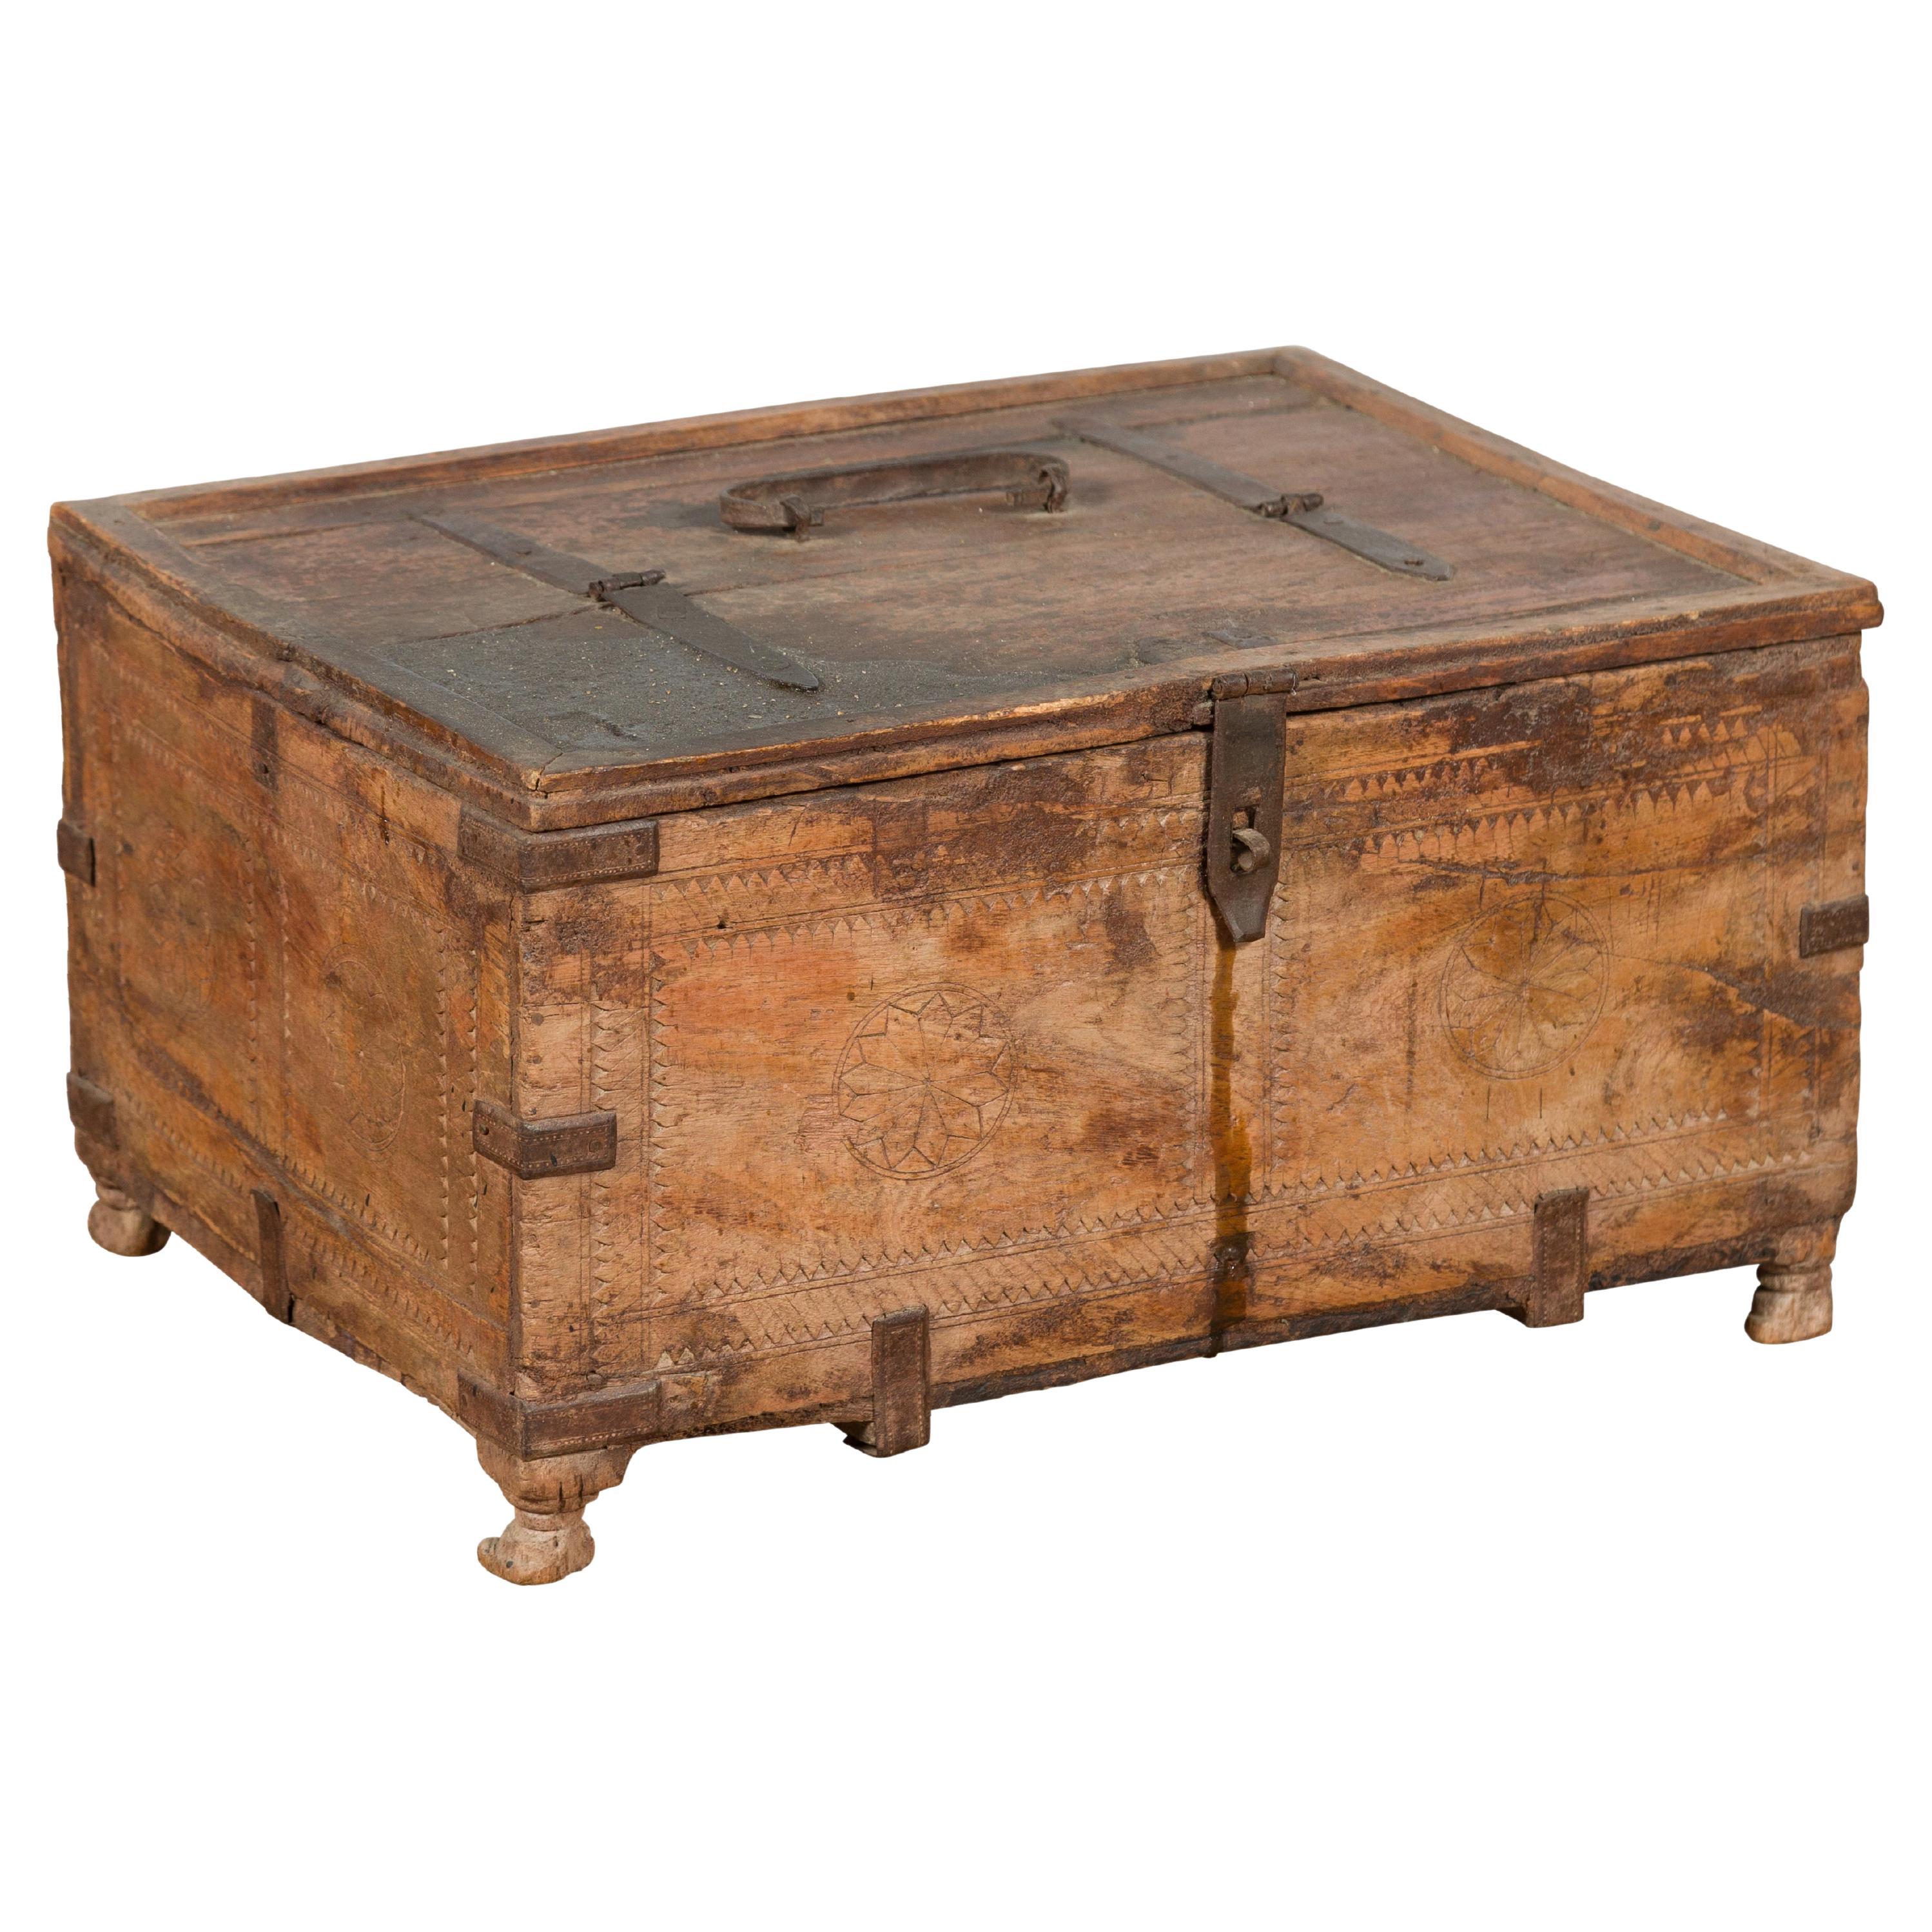 Rustic Indian 19th Century Treasure Box with Carved Rosettes and Small Feet